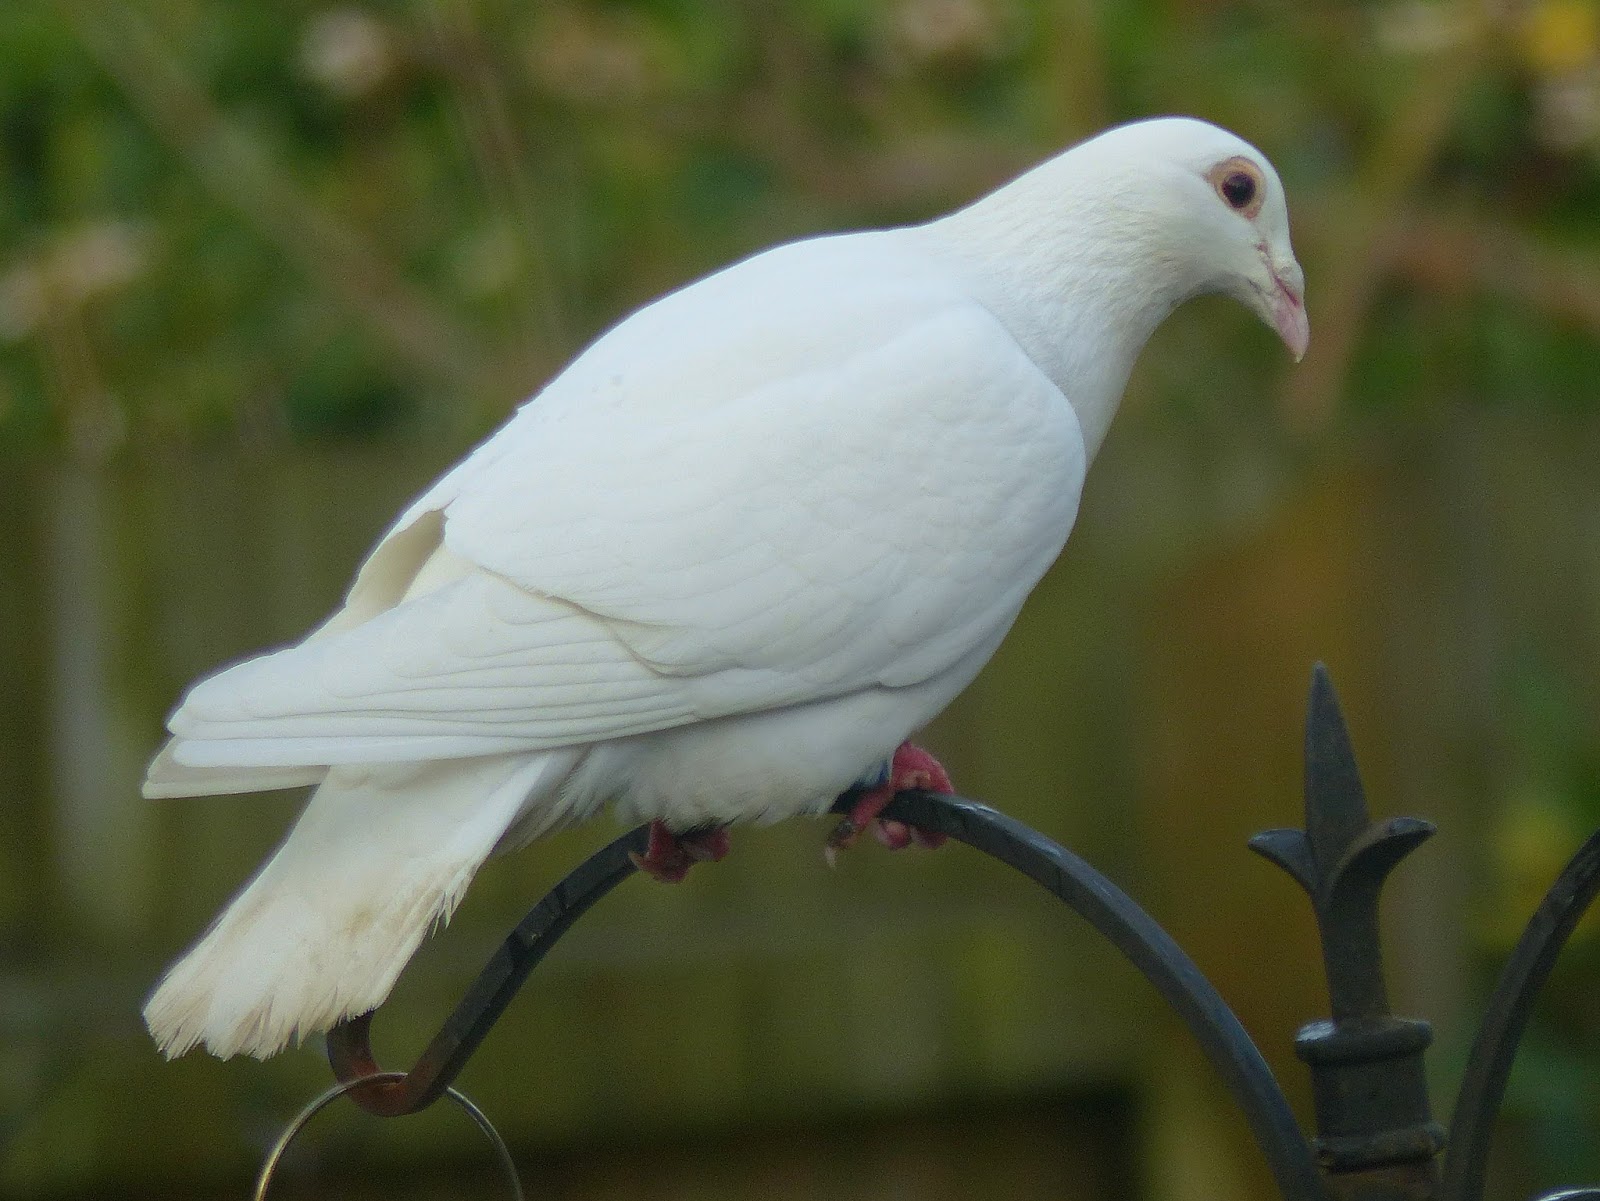 visit from white dove